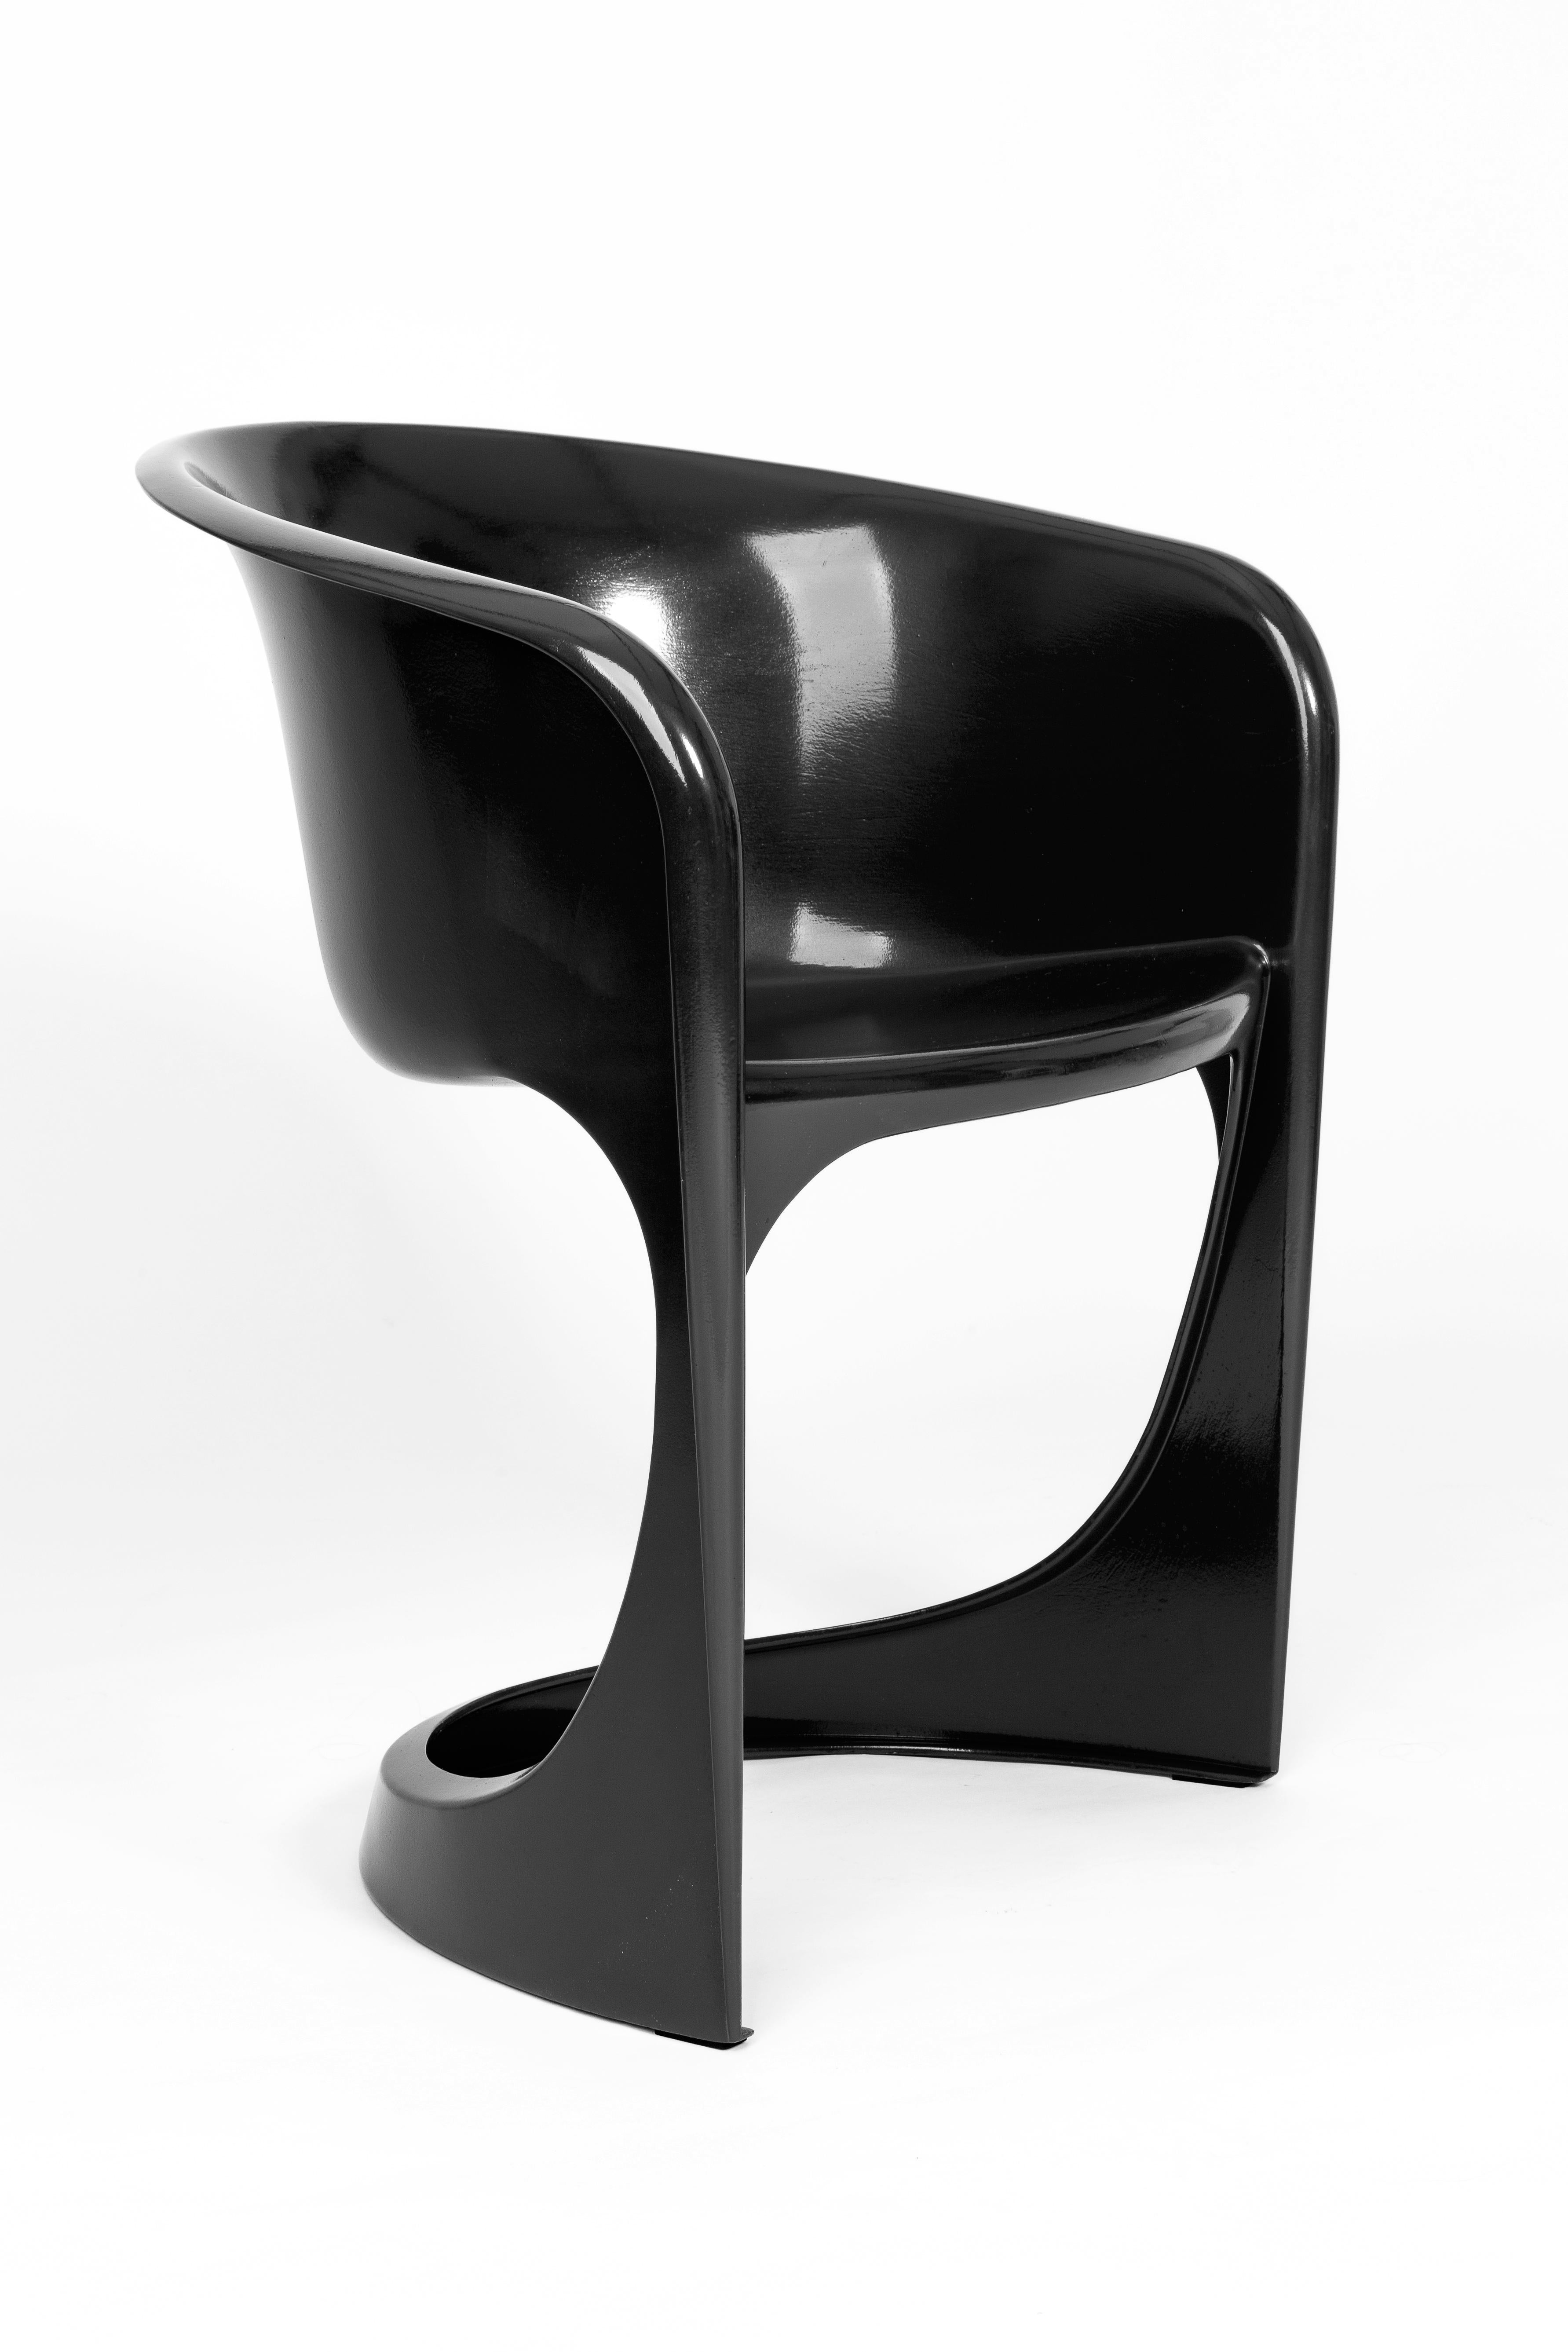 Hand-Painted Set of Four Black Glossy Cado Chairs, Steen Østergaard, 1974 For Sale